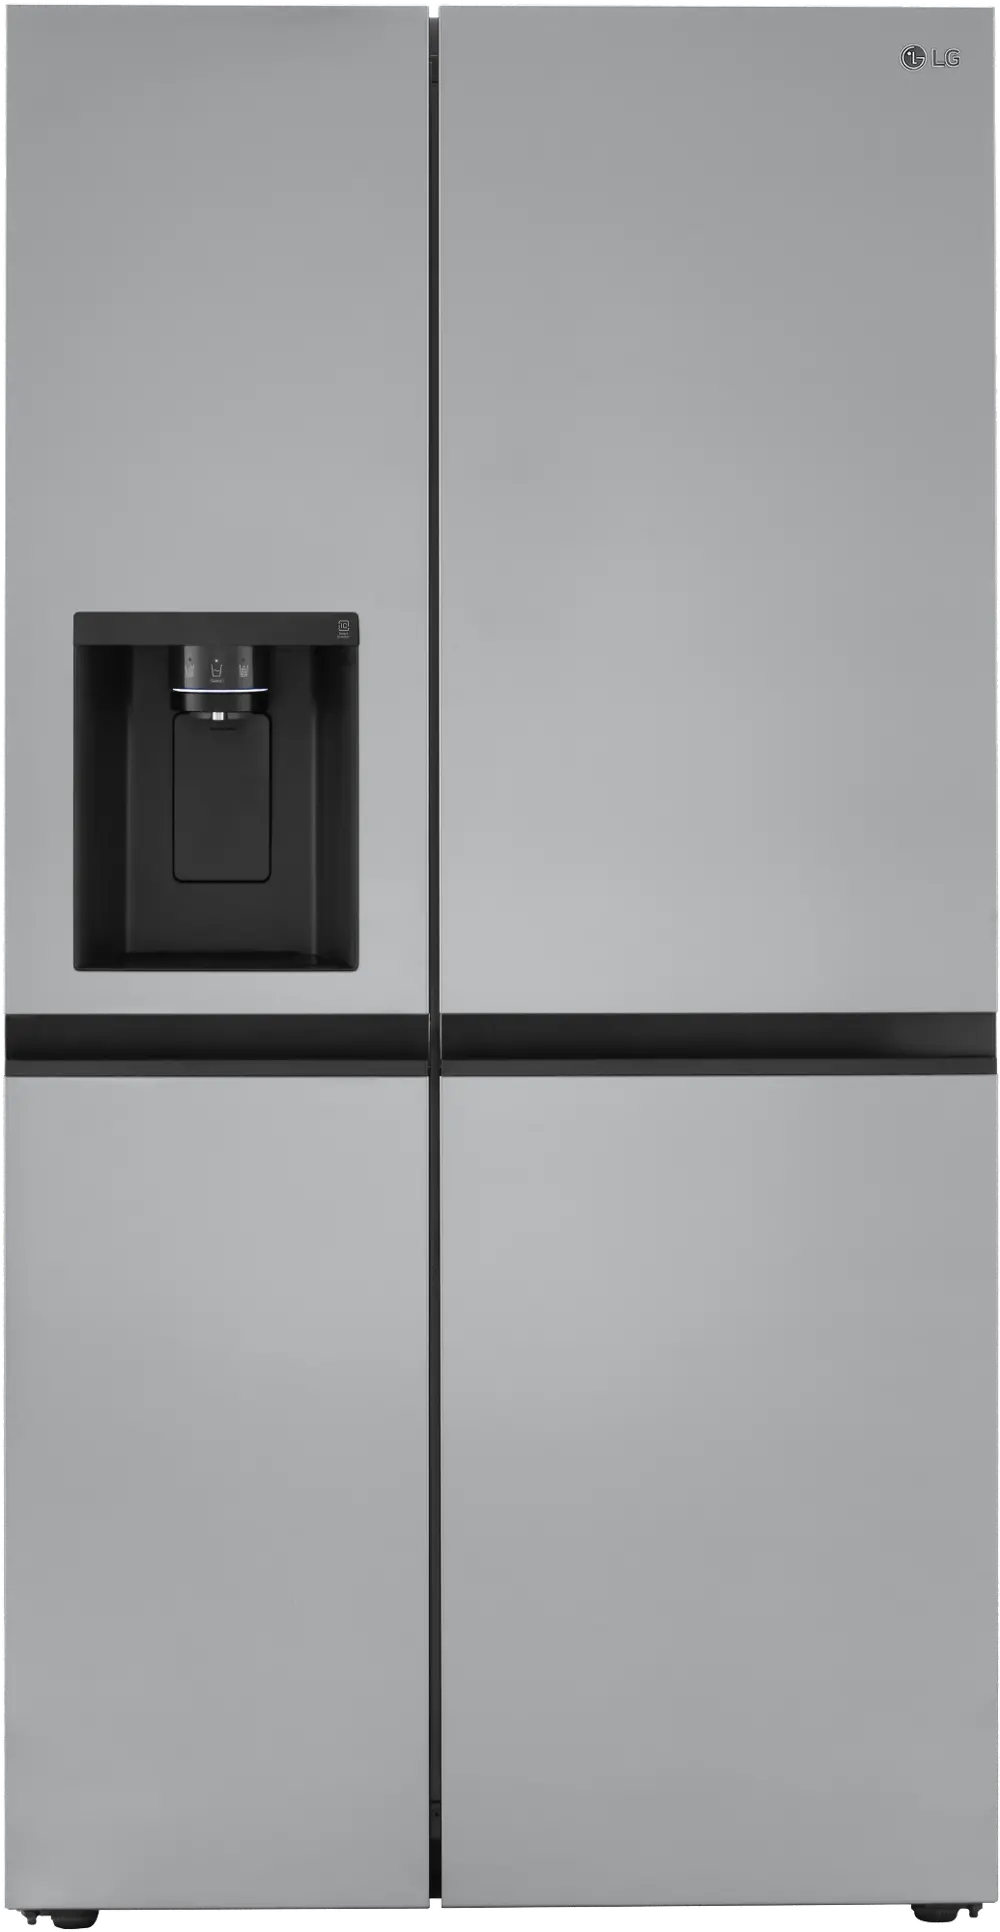 LRSXS2706S LG 27.2 cu ft Side by Side Refrigerator - Stainless Steel-1